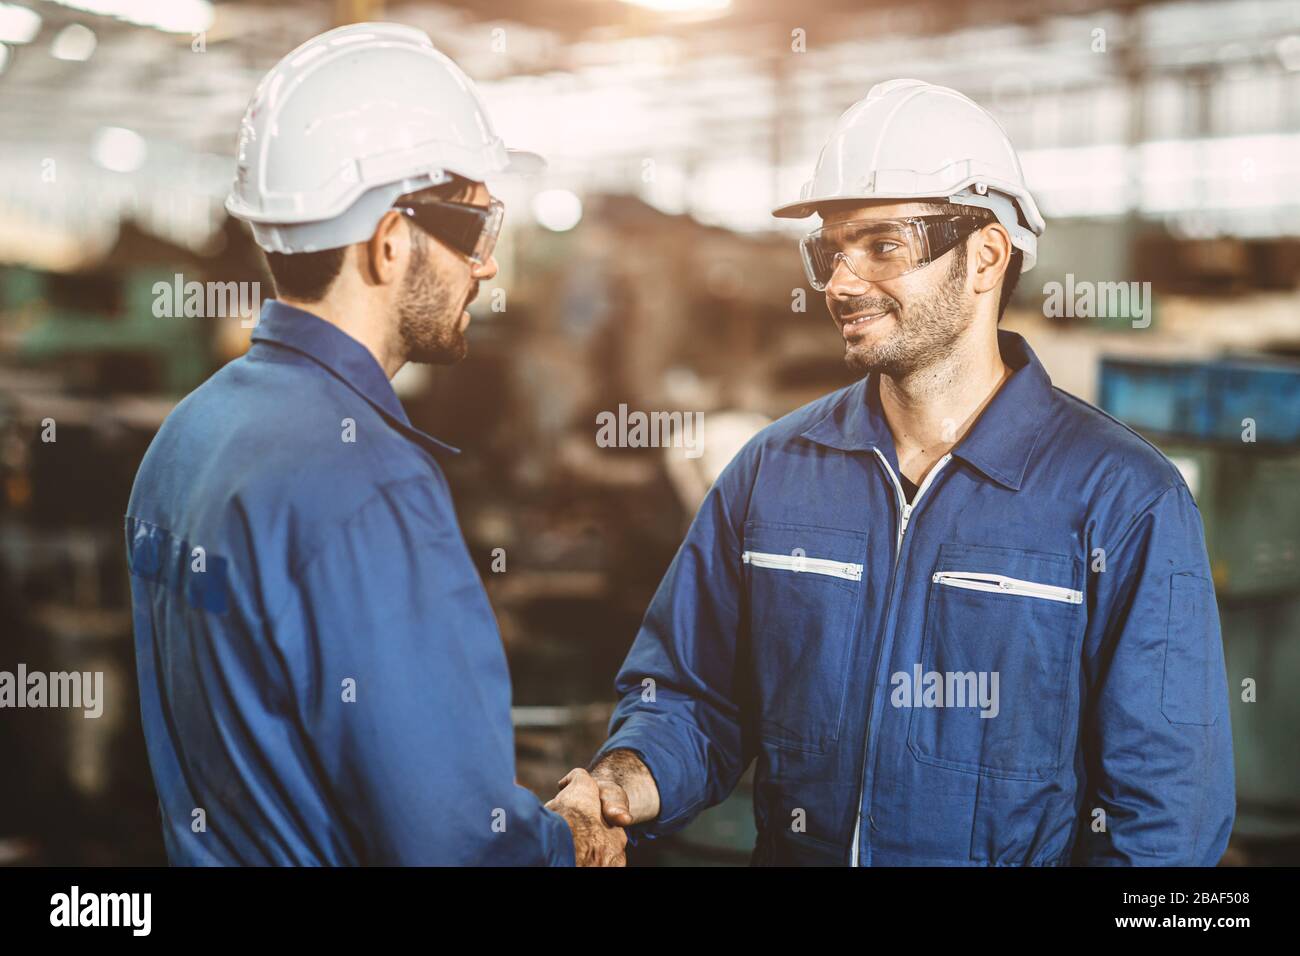 Worker engineer team smiling handshake for finish working dealing job done in factory industry background. Stock Photo